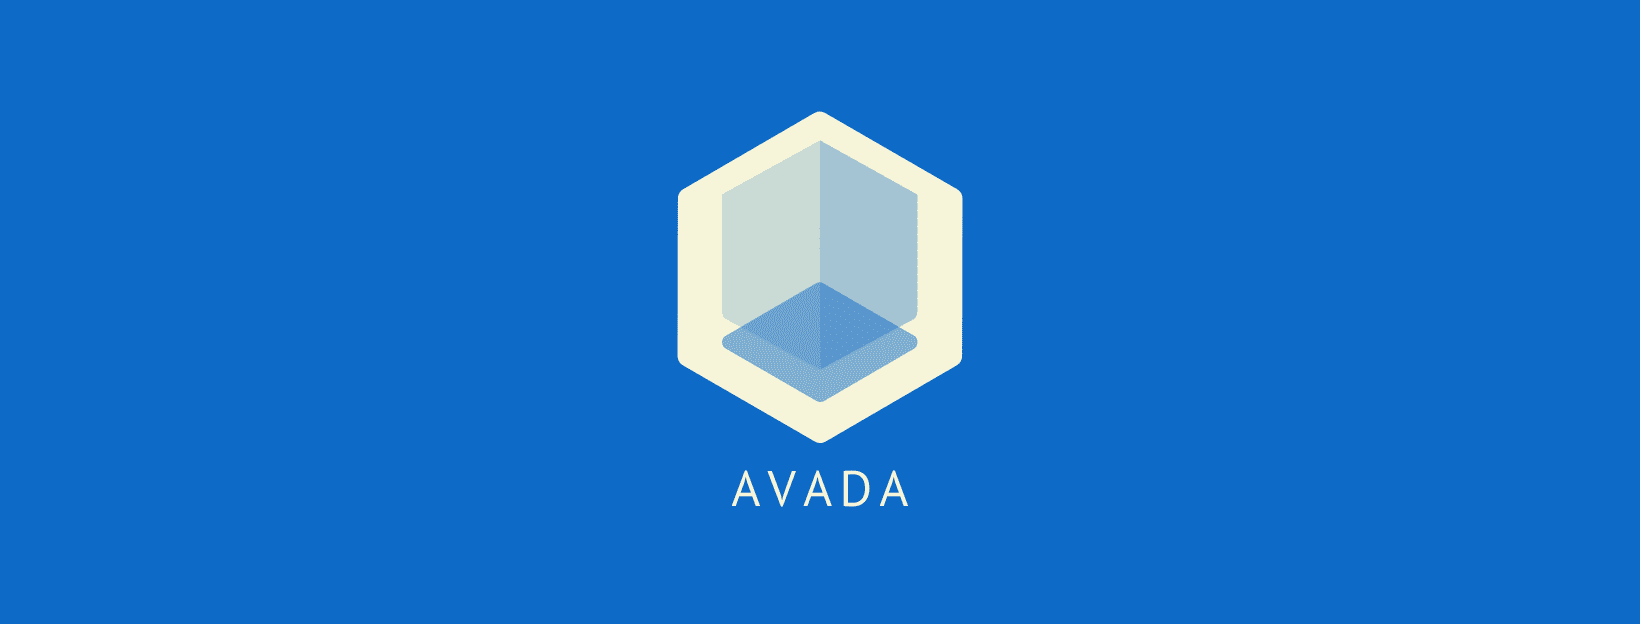 https://avada.io/assets/images/avada-defaut-banner.png